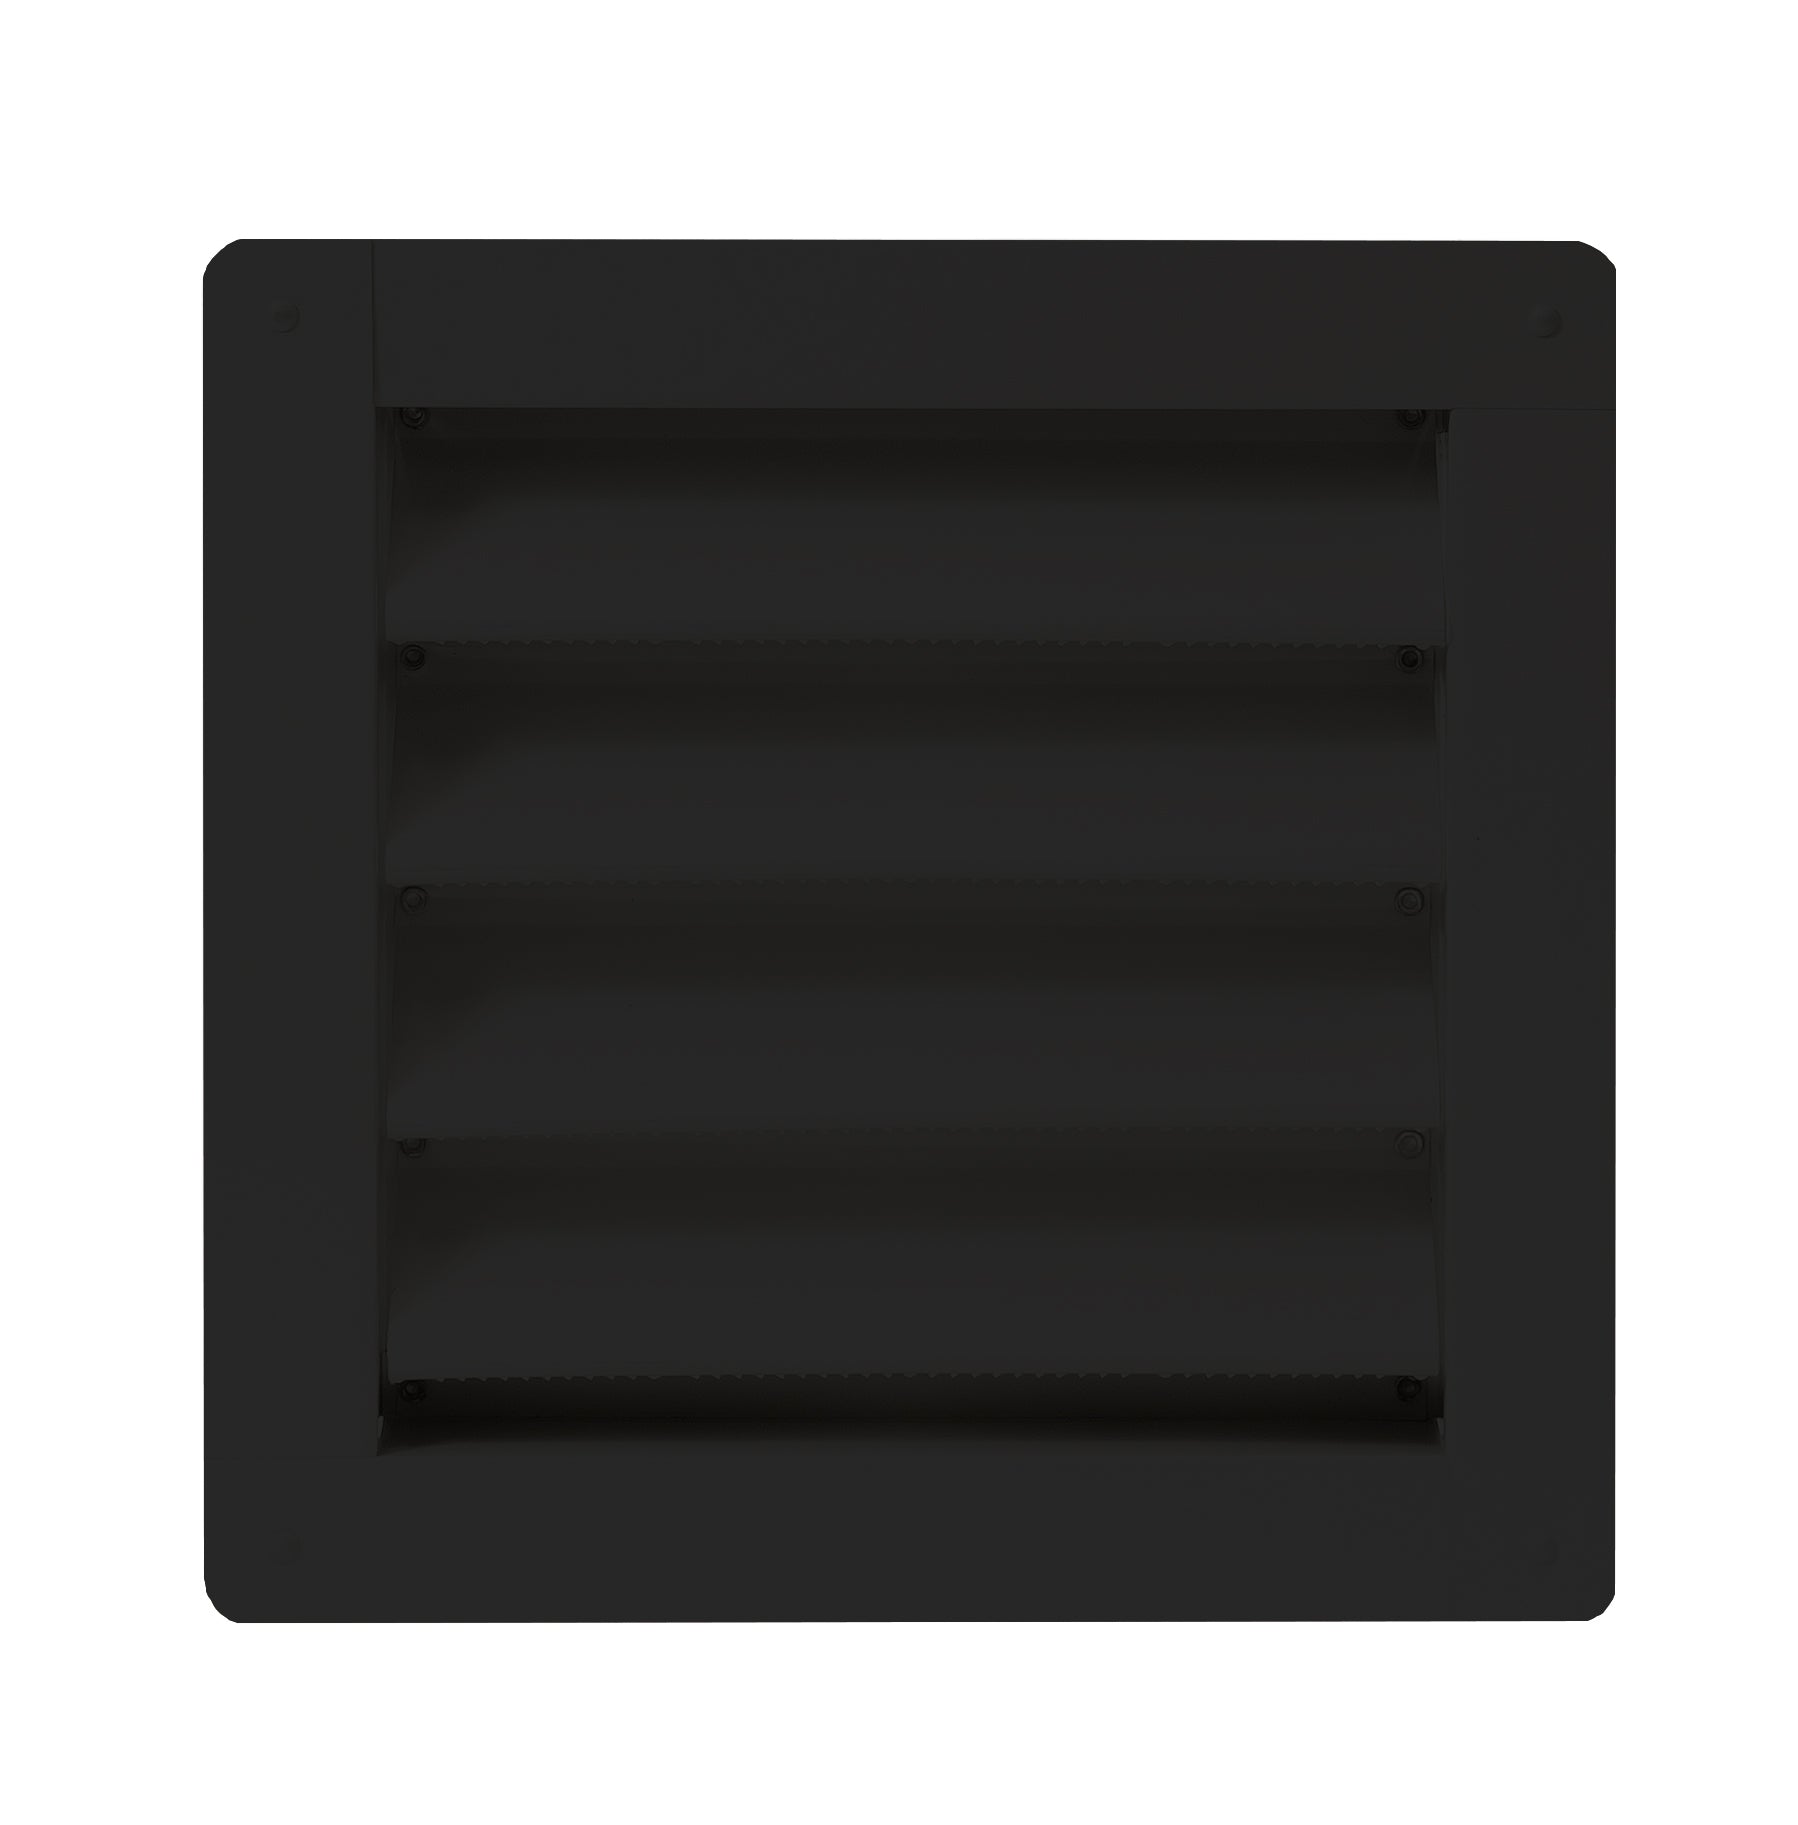 8" x 8" Flush Mount Aluminum Black Wall Vent for Sheds, Playhouses, and MORE